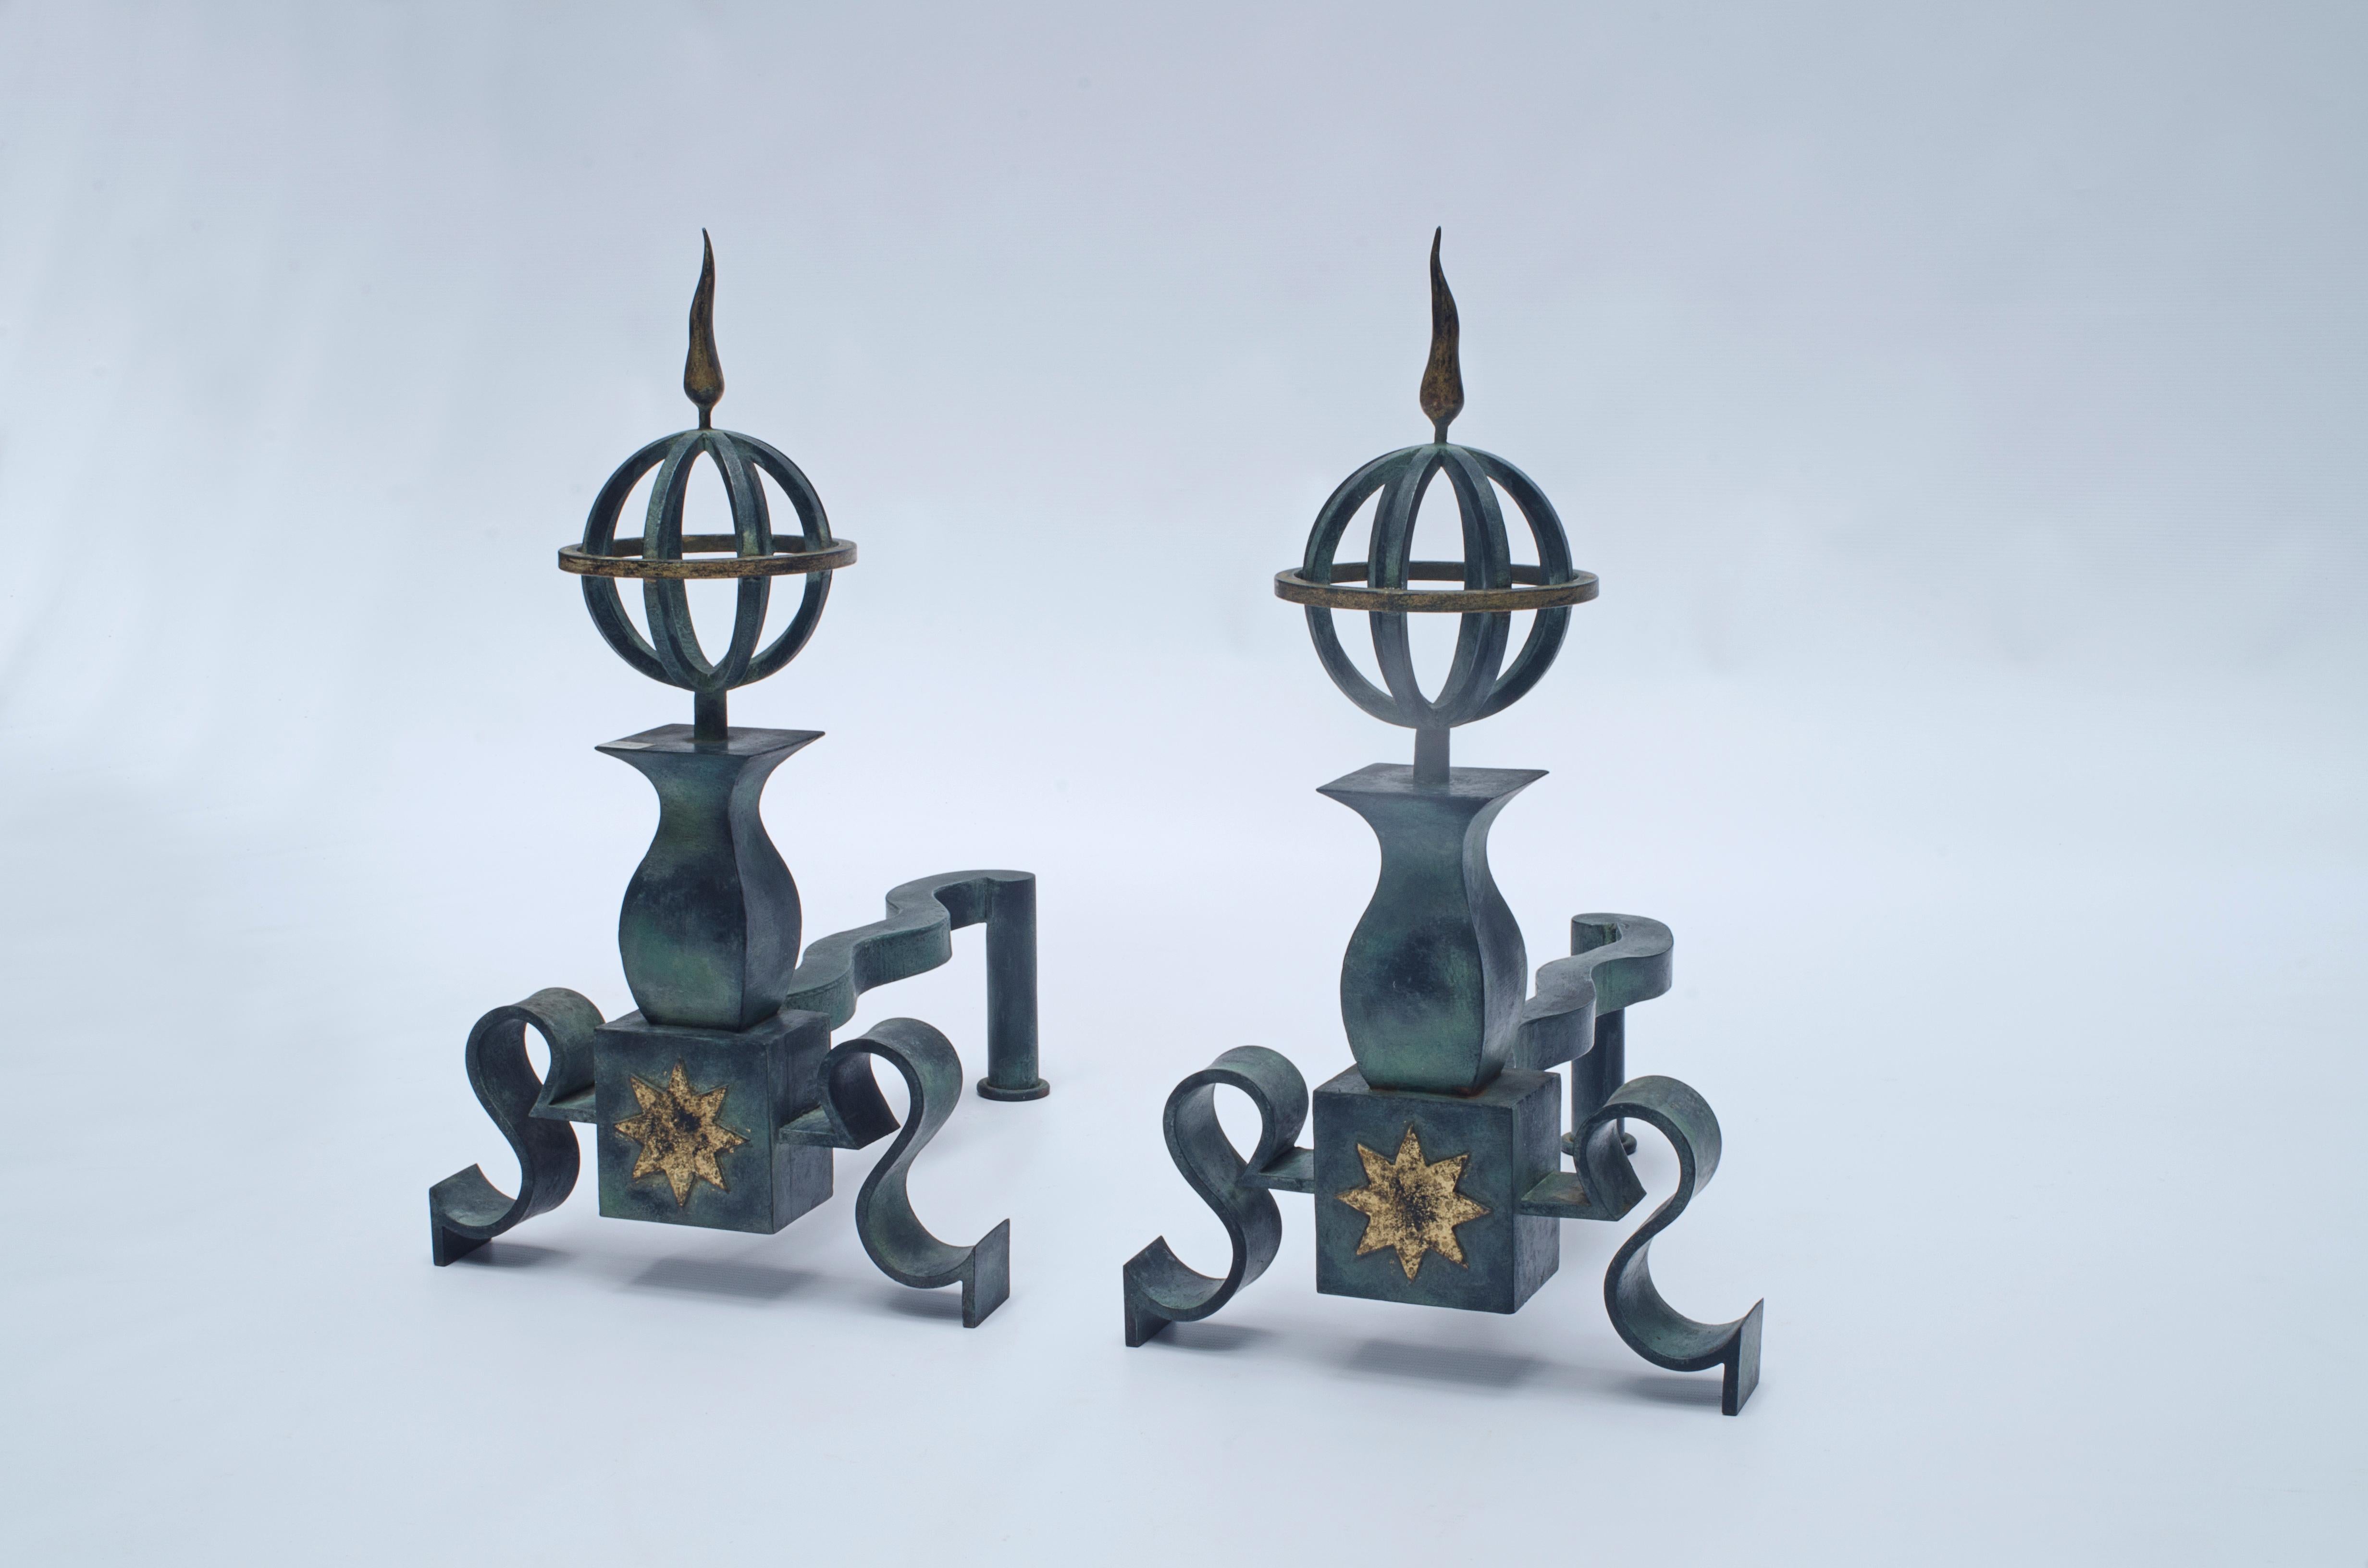 Pair of green and gold patinated iron andirons made by Gilbert Pollerat (1902-1988).

France, circa 1940.

Karl Lagerfeld and Francois Baudot (1998) “Gilbert Pollerat, Maître Ferronnier”. Q-227.